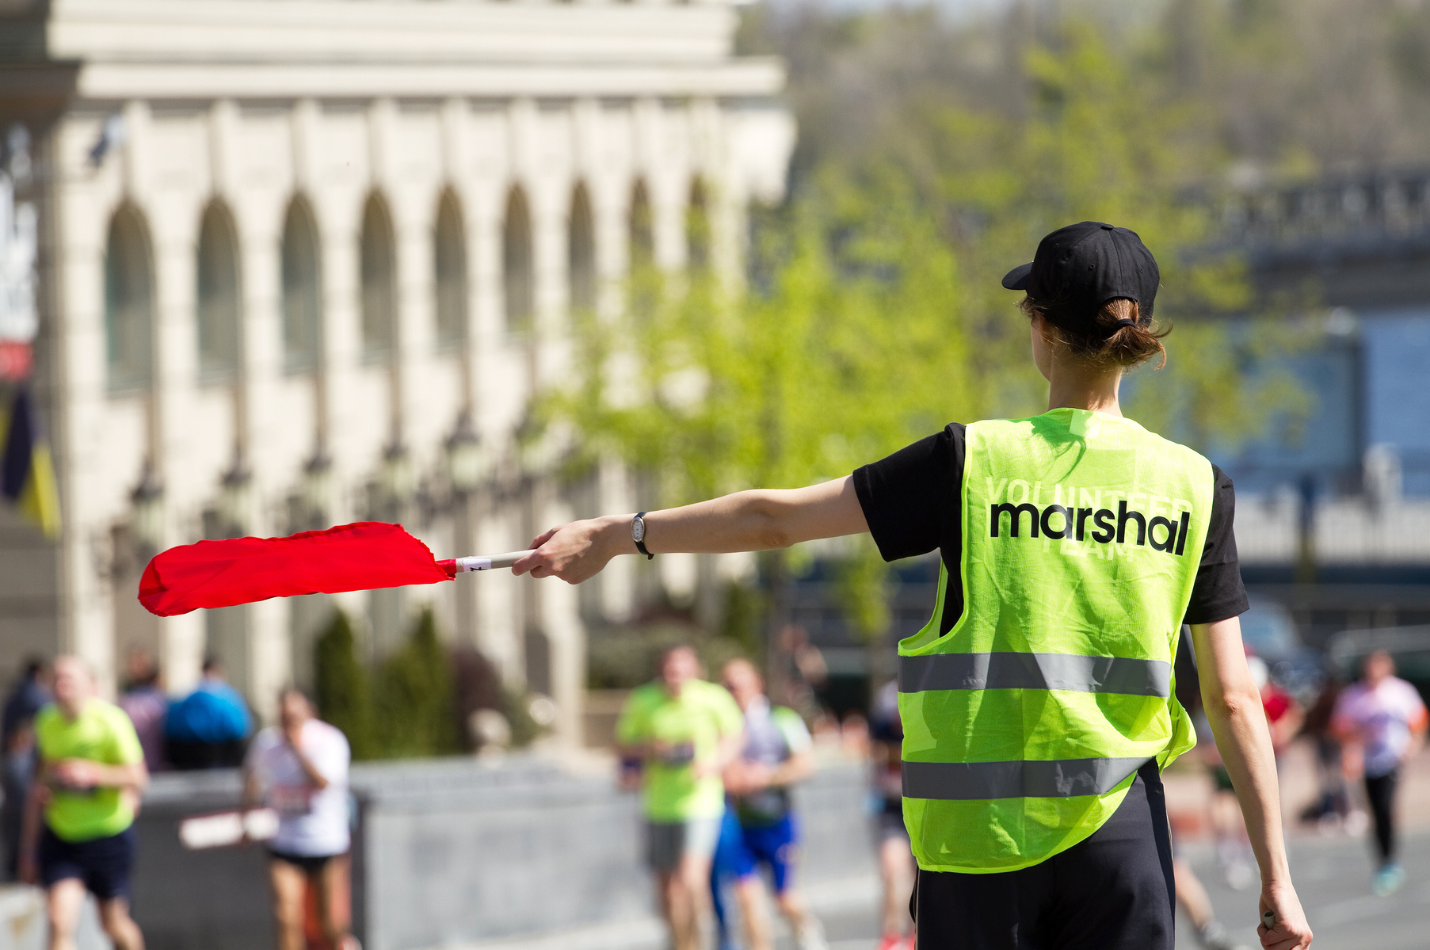 A volunteer wearing a black t-shirt, black cap and a yellow high-vis vest with 'volunteer marshal' written on the back. Her left arm is out to the side, holding a red flag to direct runners on a course.